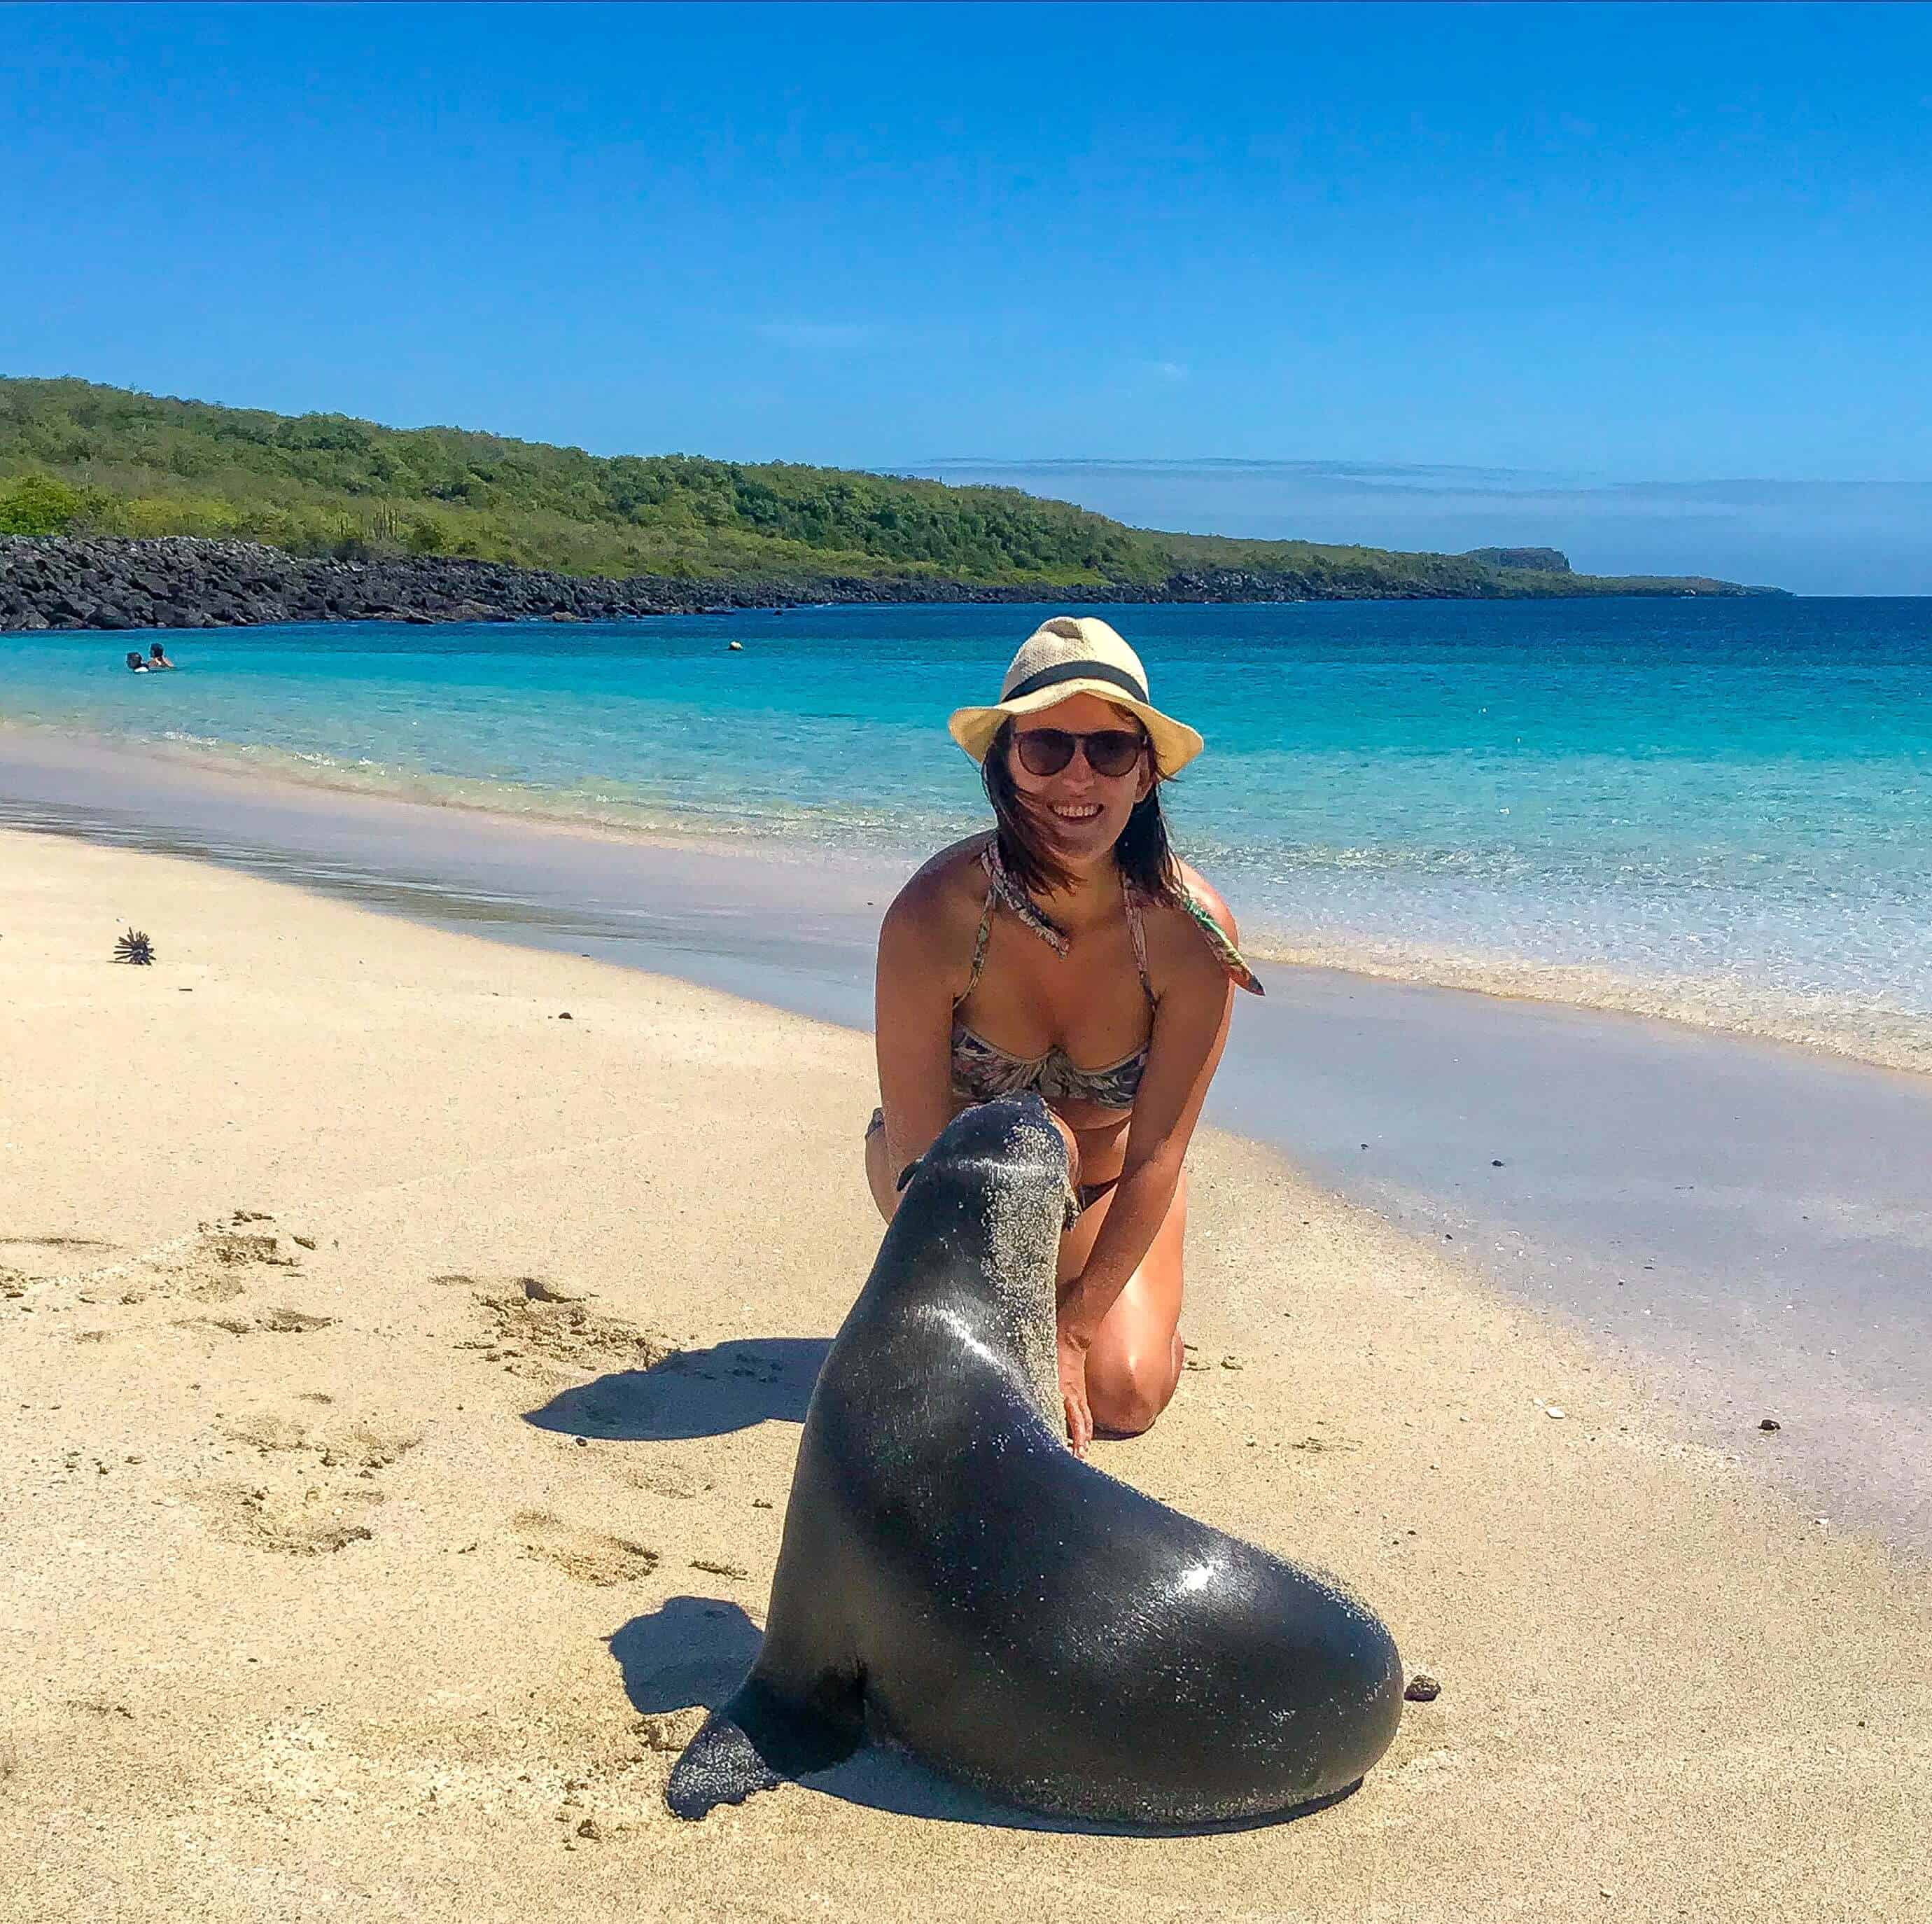 Lora with sea lions on beach in San Cristobal